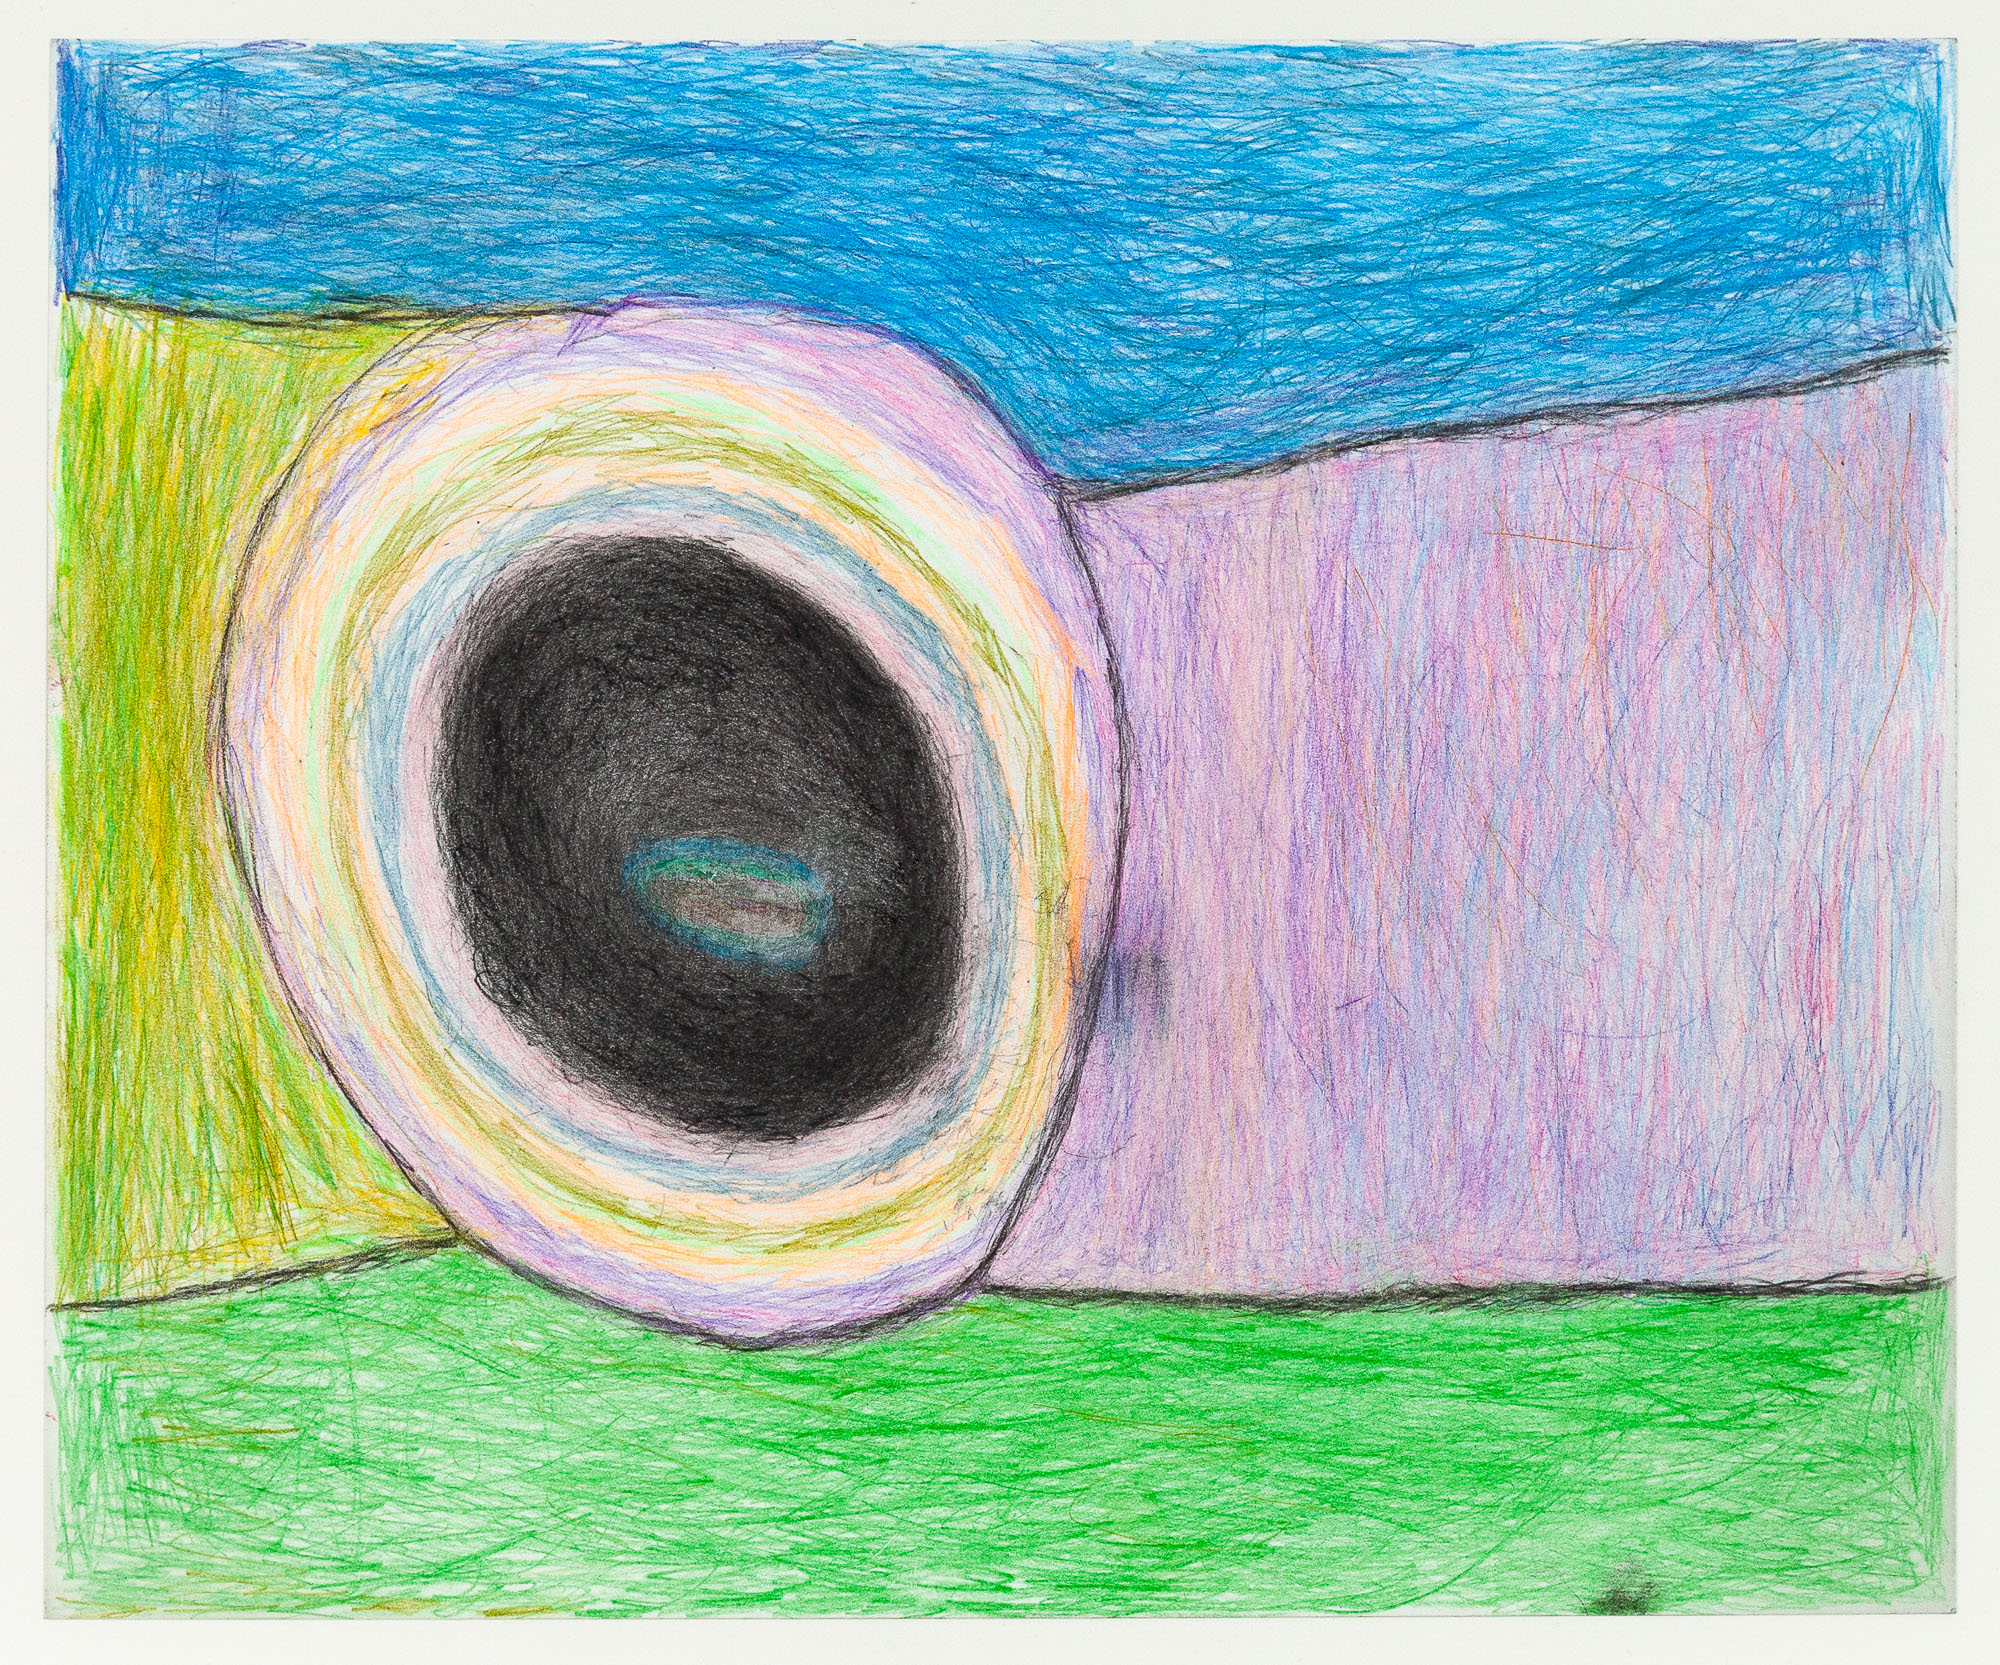  Susan Pasowicz,  Something Super , 2019, Color Pencil on Paper, 17.5” x 13.5” 